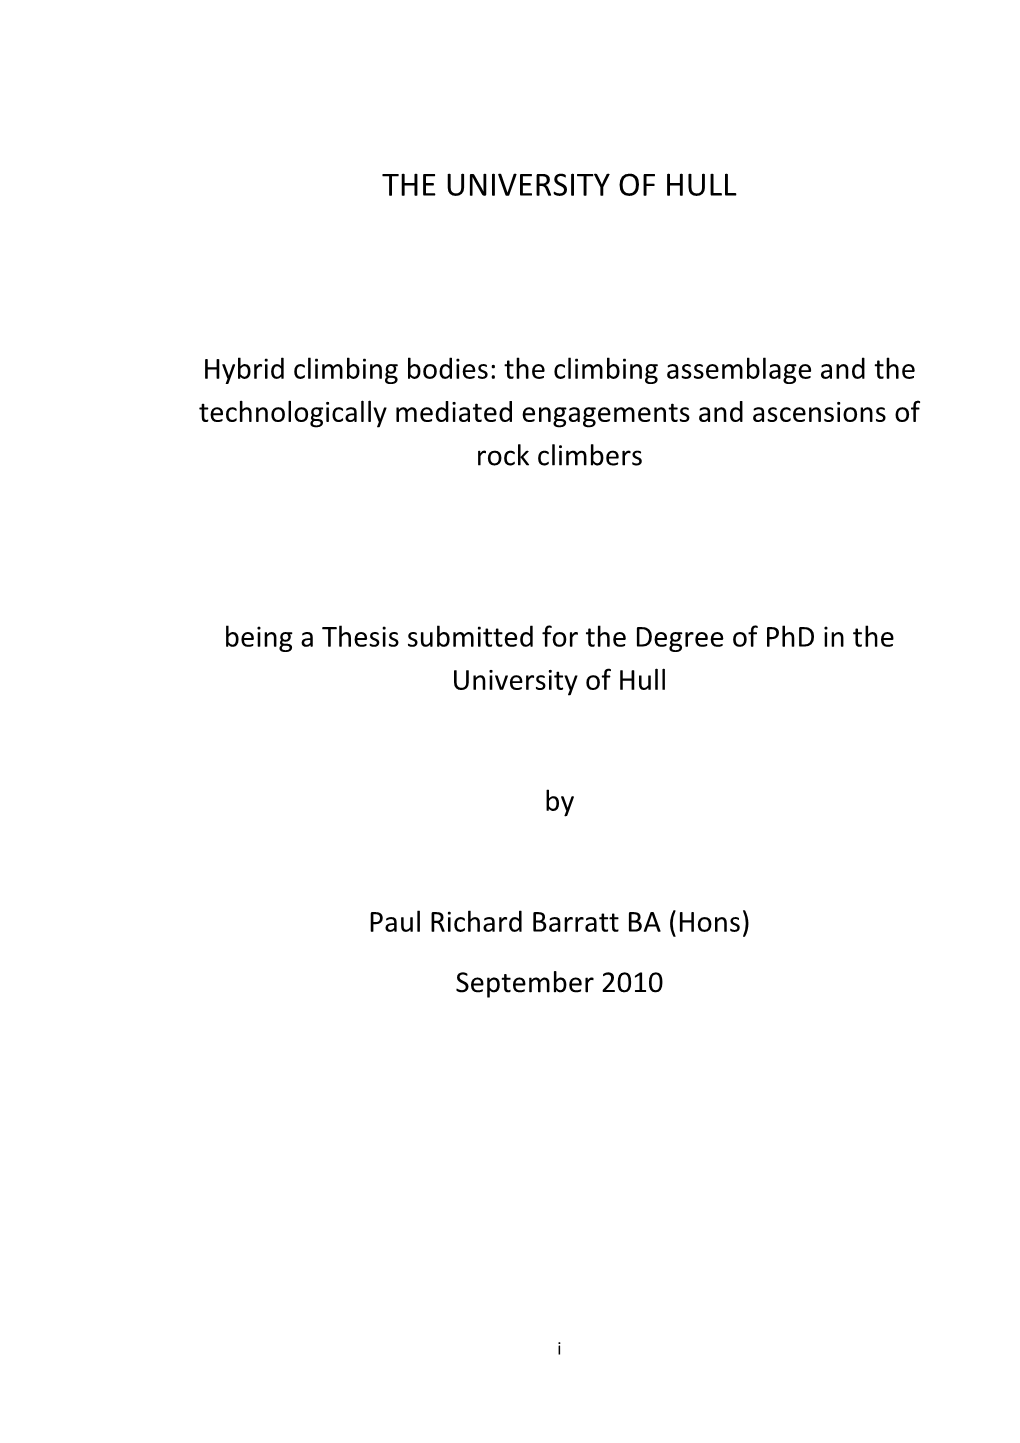 Thesis Submitted for the Degree of Phd in the University of Hull